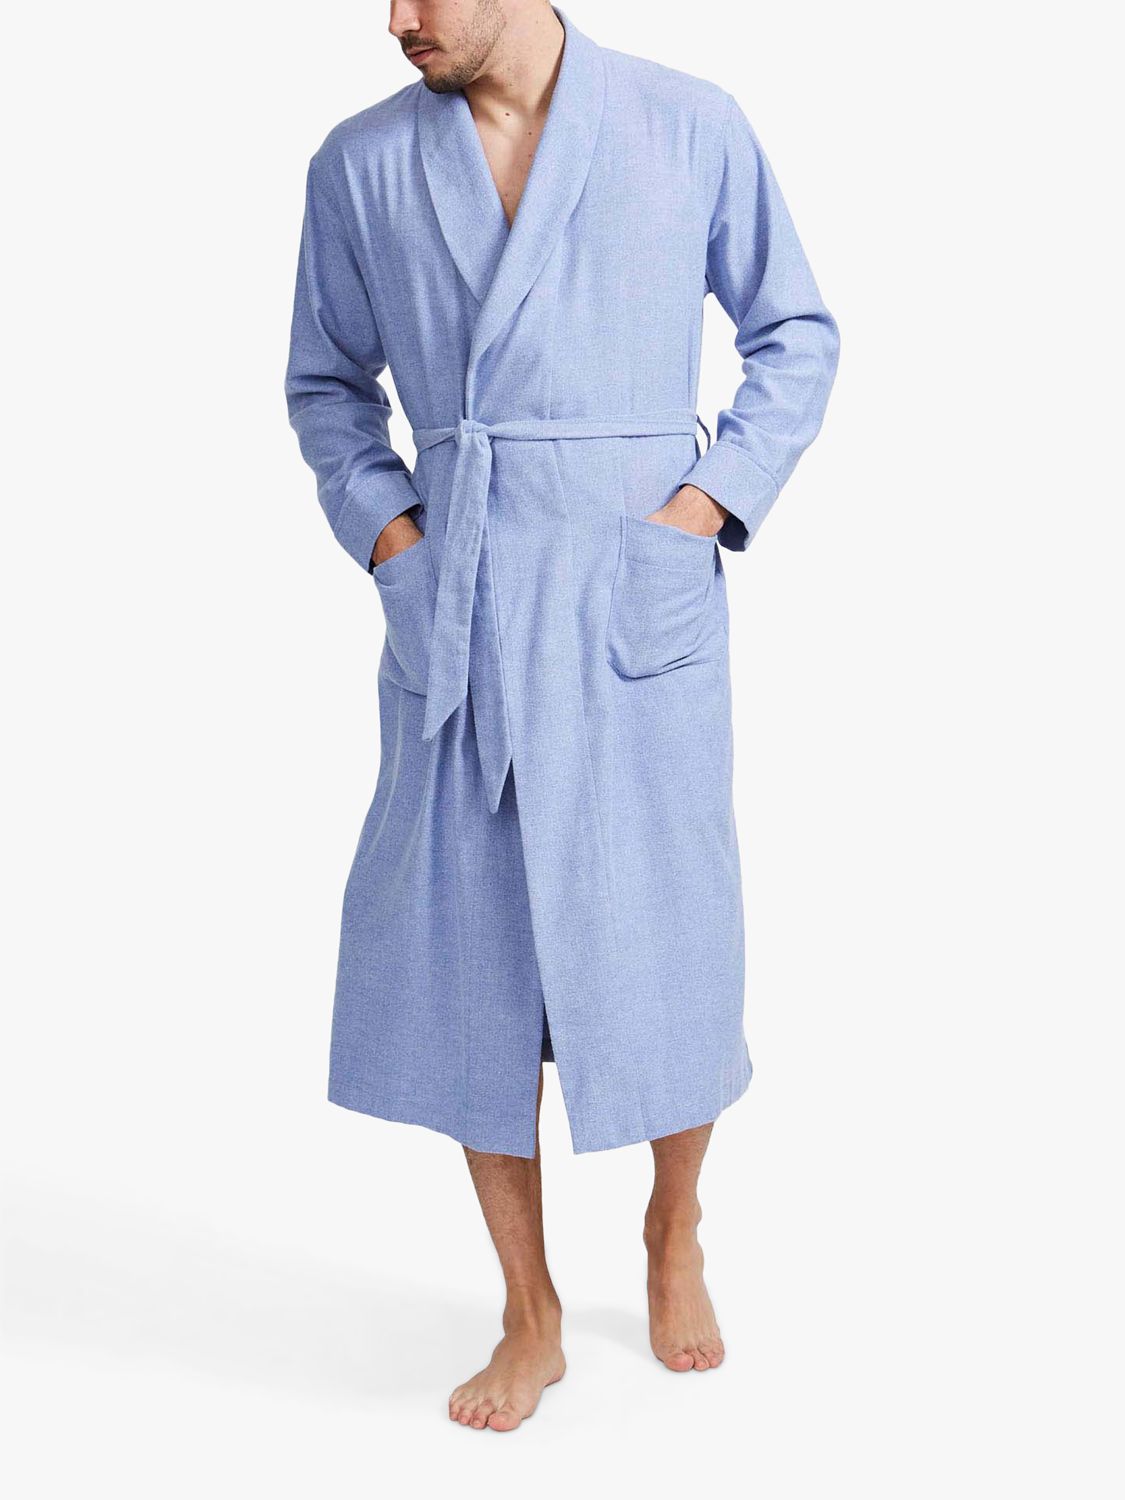 British Boxers Herringbone Brushed Cotton Dressing Gown, Staffordshire Blue, S